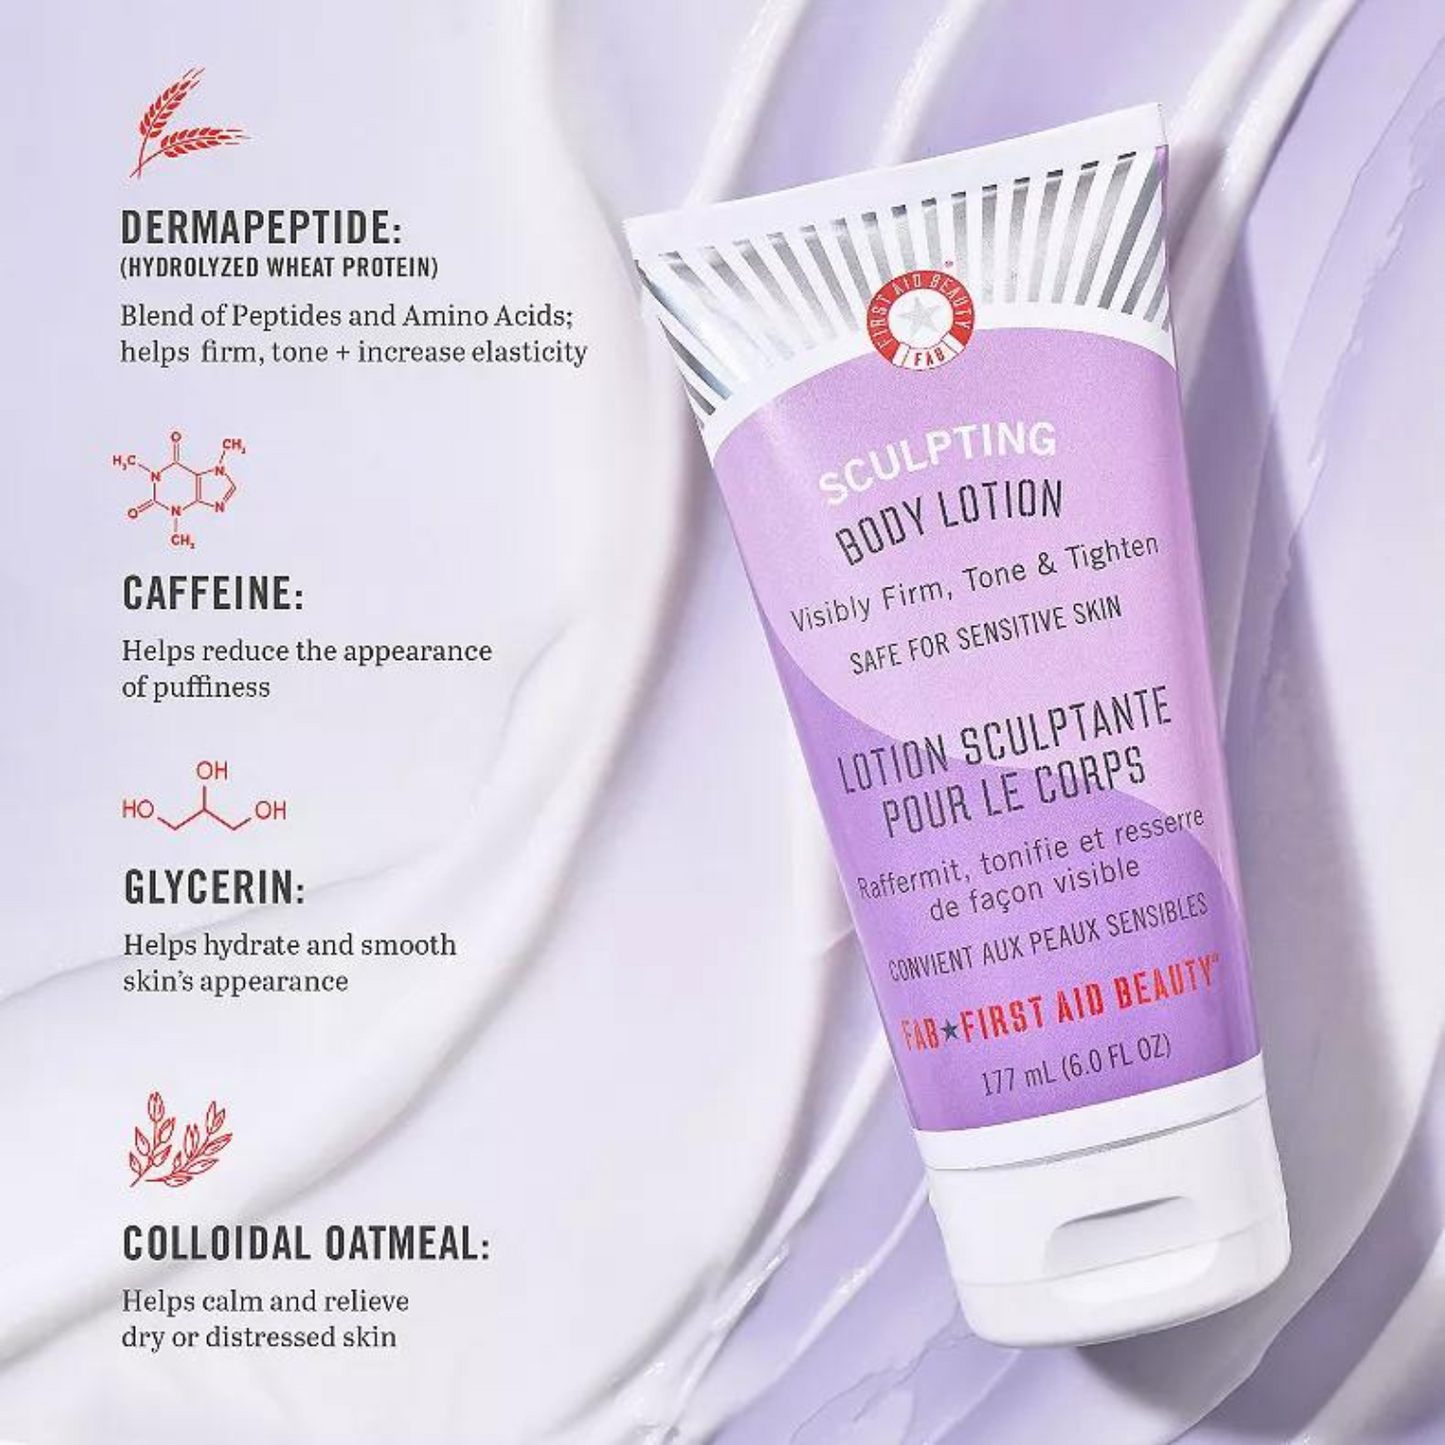 First Aid Beauty - Sculpting Body Lotion